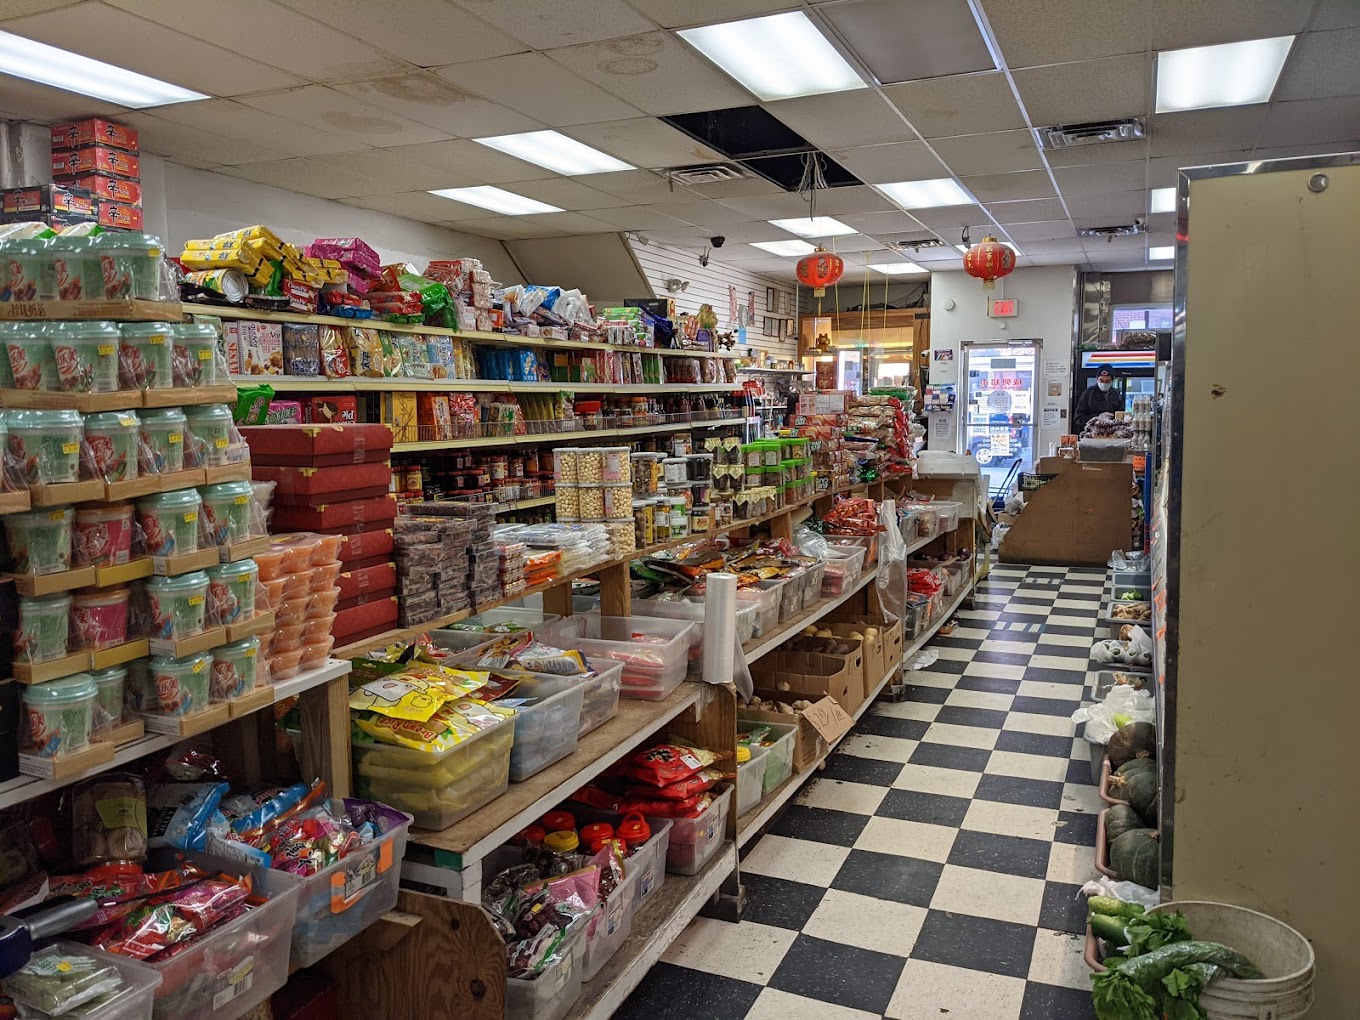 Best Choice Oriental Grocery One of the Best Asian Grocery Stores in Los Angeles